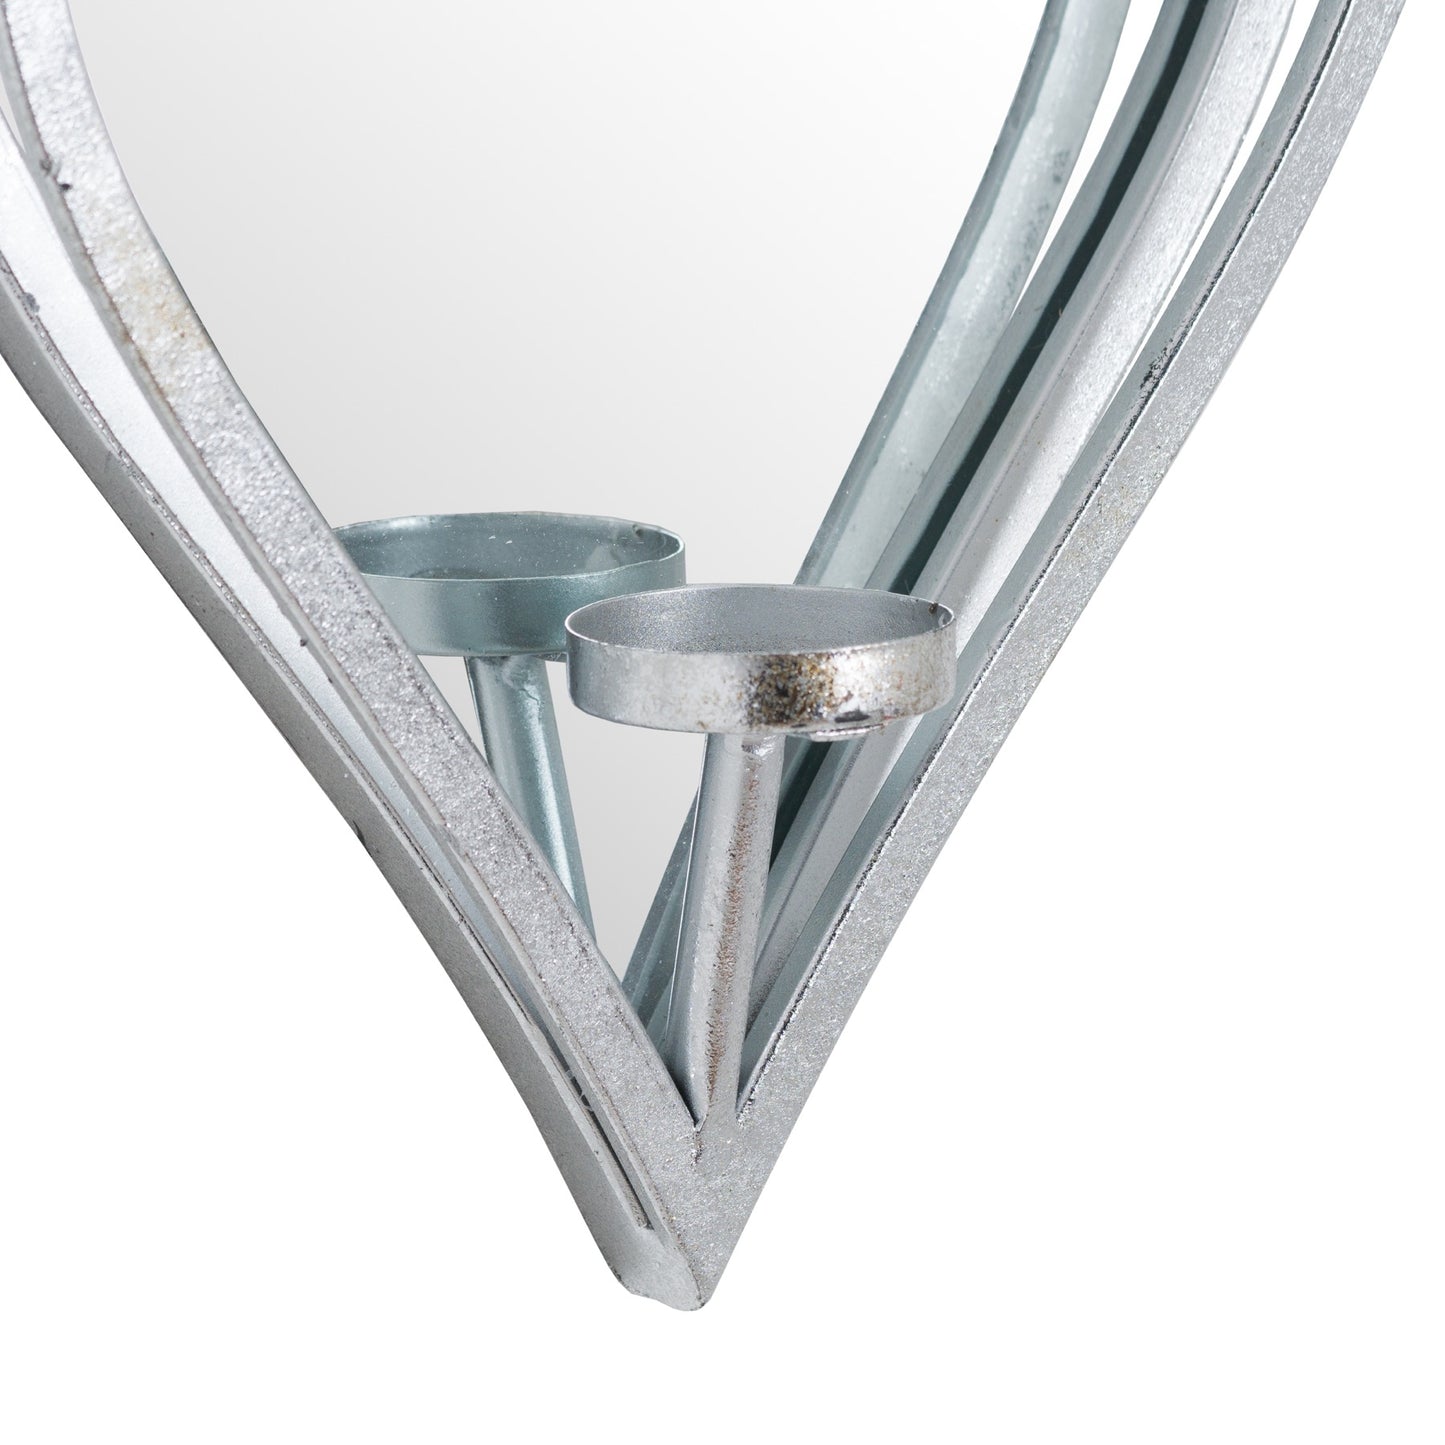 Large Silver Mirrored Heart Candle Holder